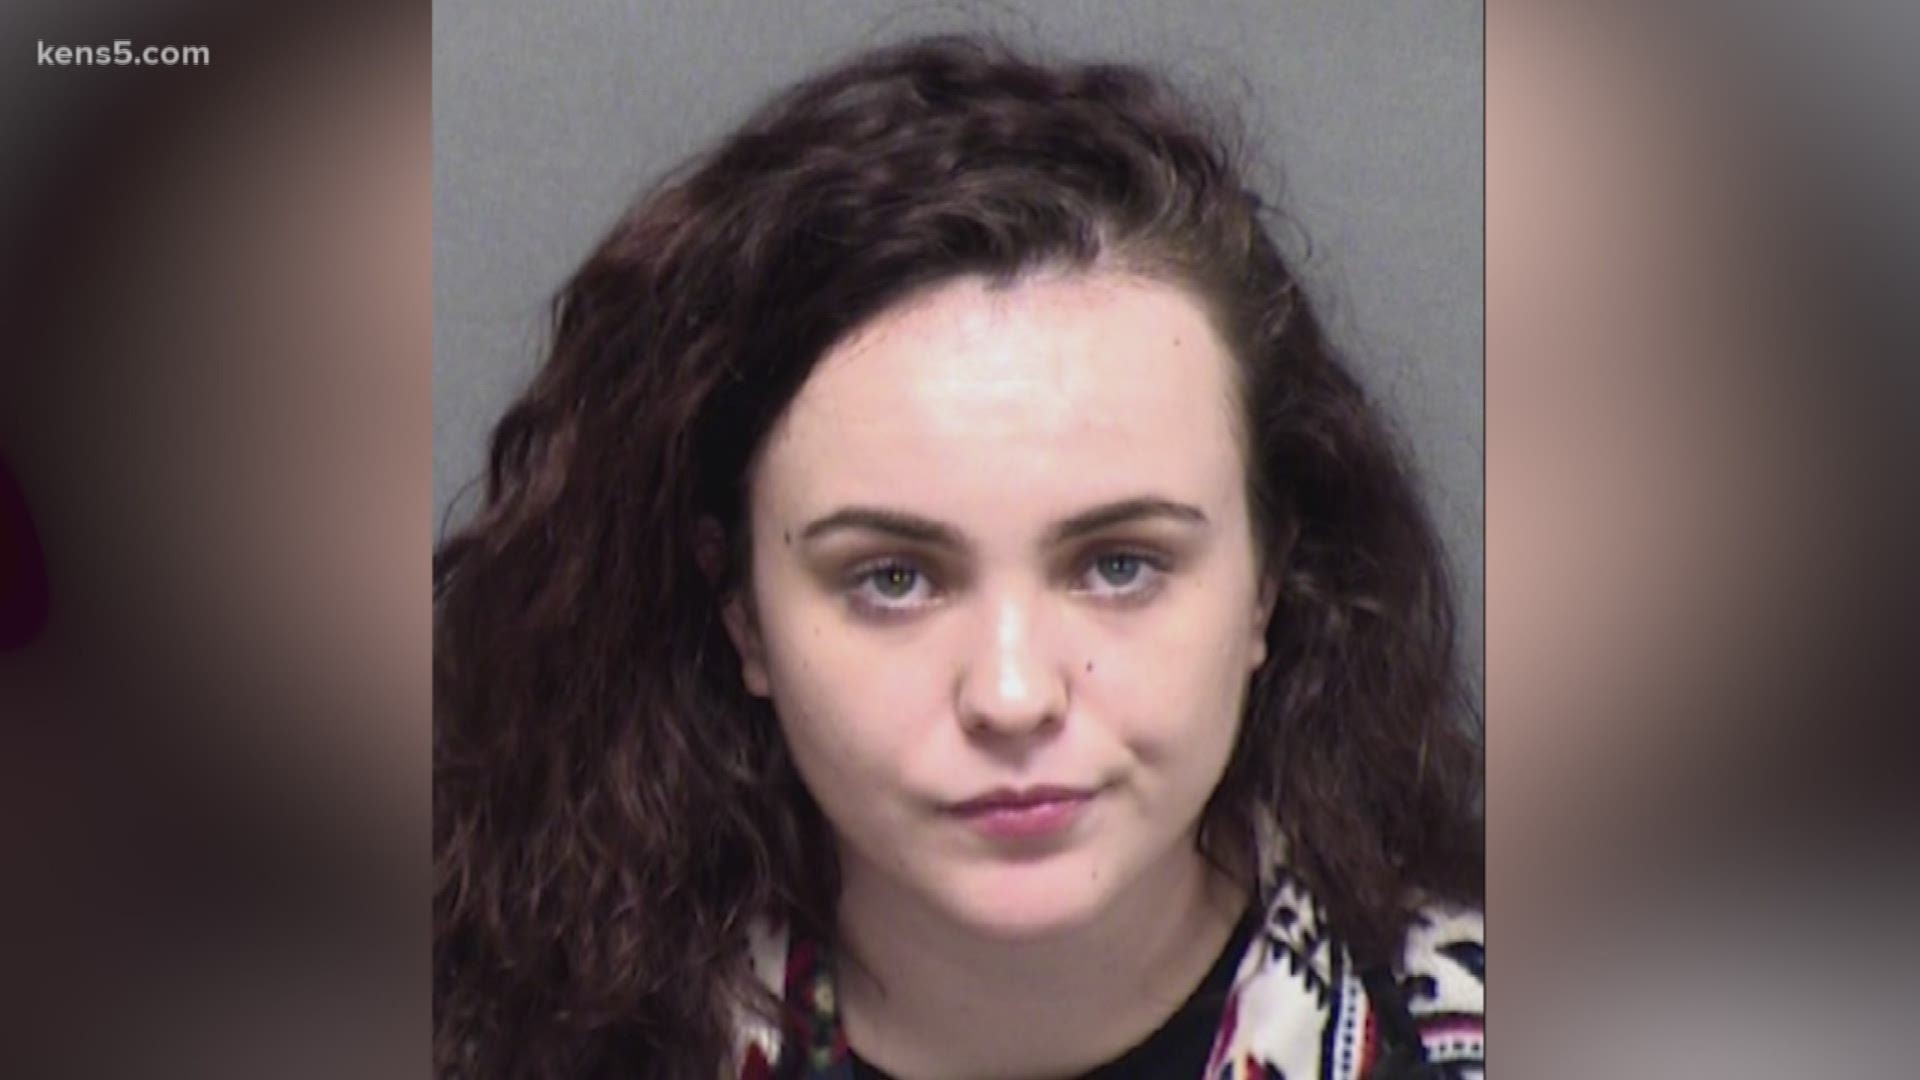 The 22-year-old suspect was told by her grandmother to care for the dogs or give them up to a shelter. According to an affidavit, she apparently did neither.